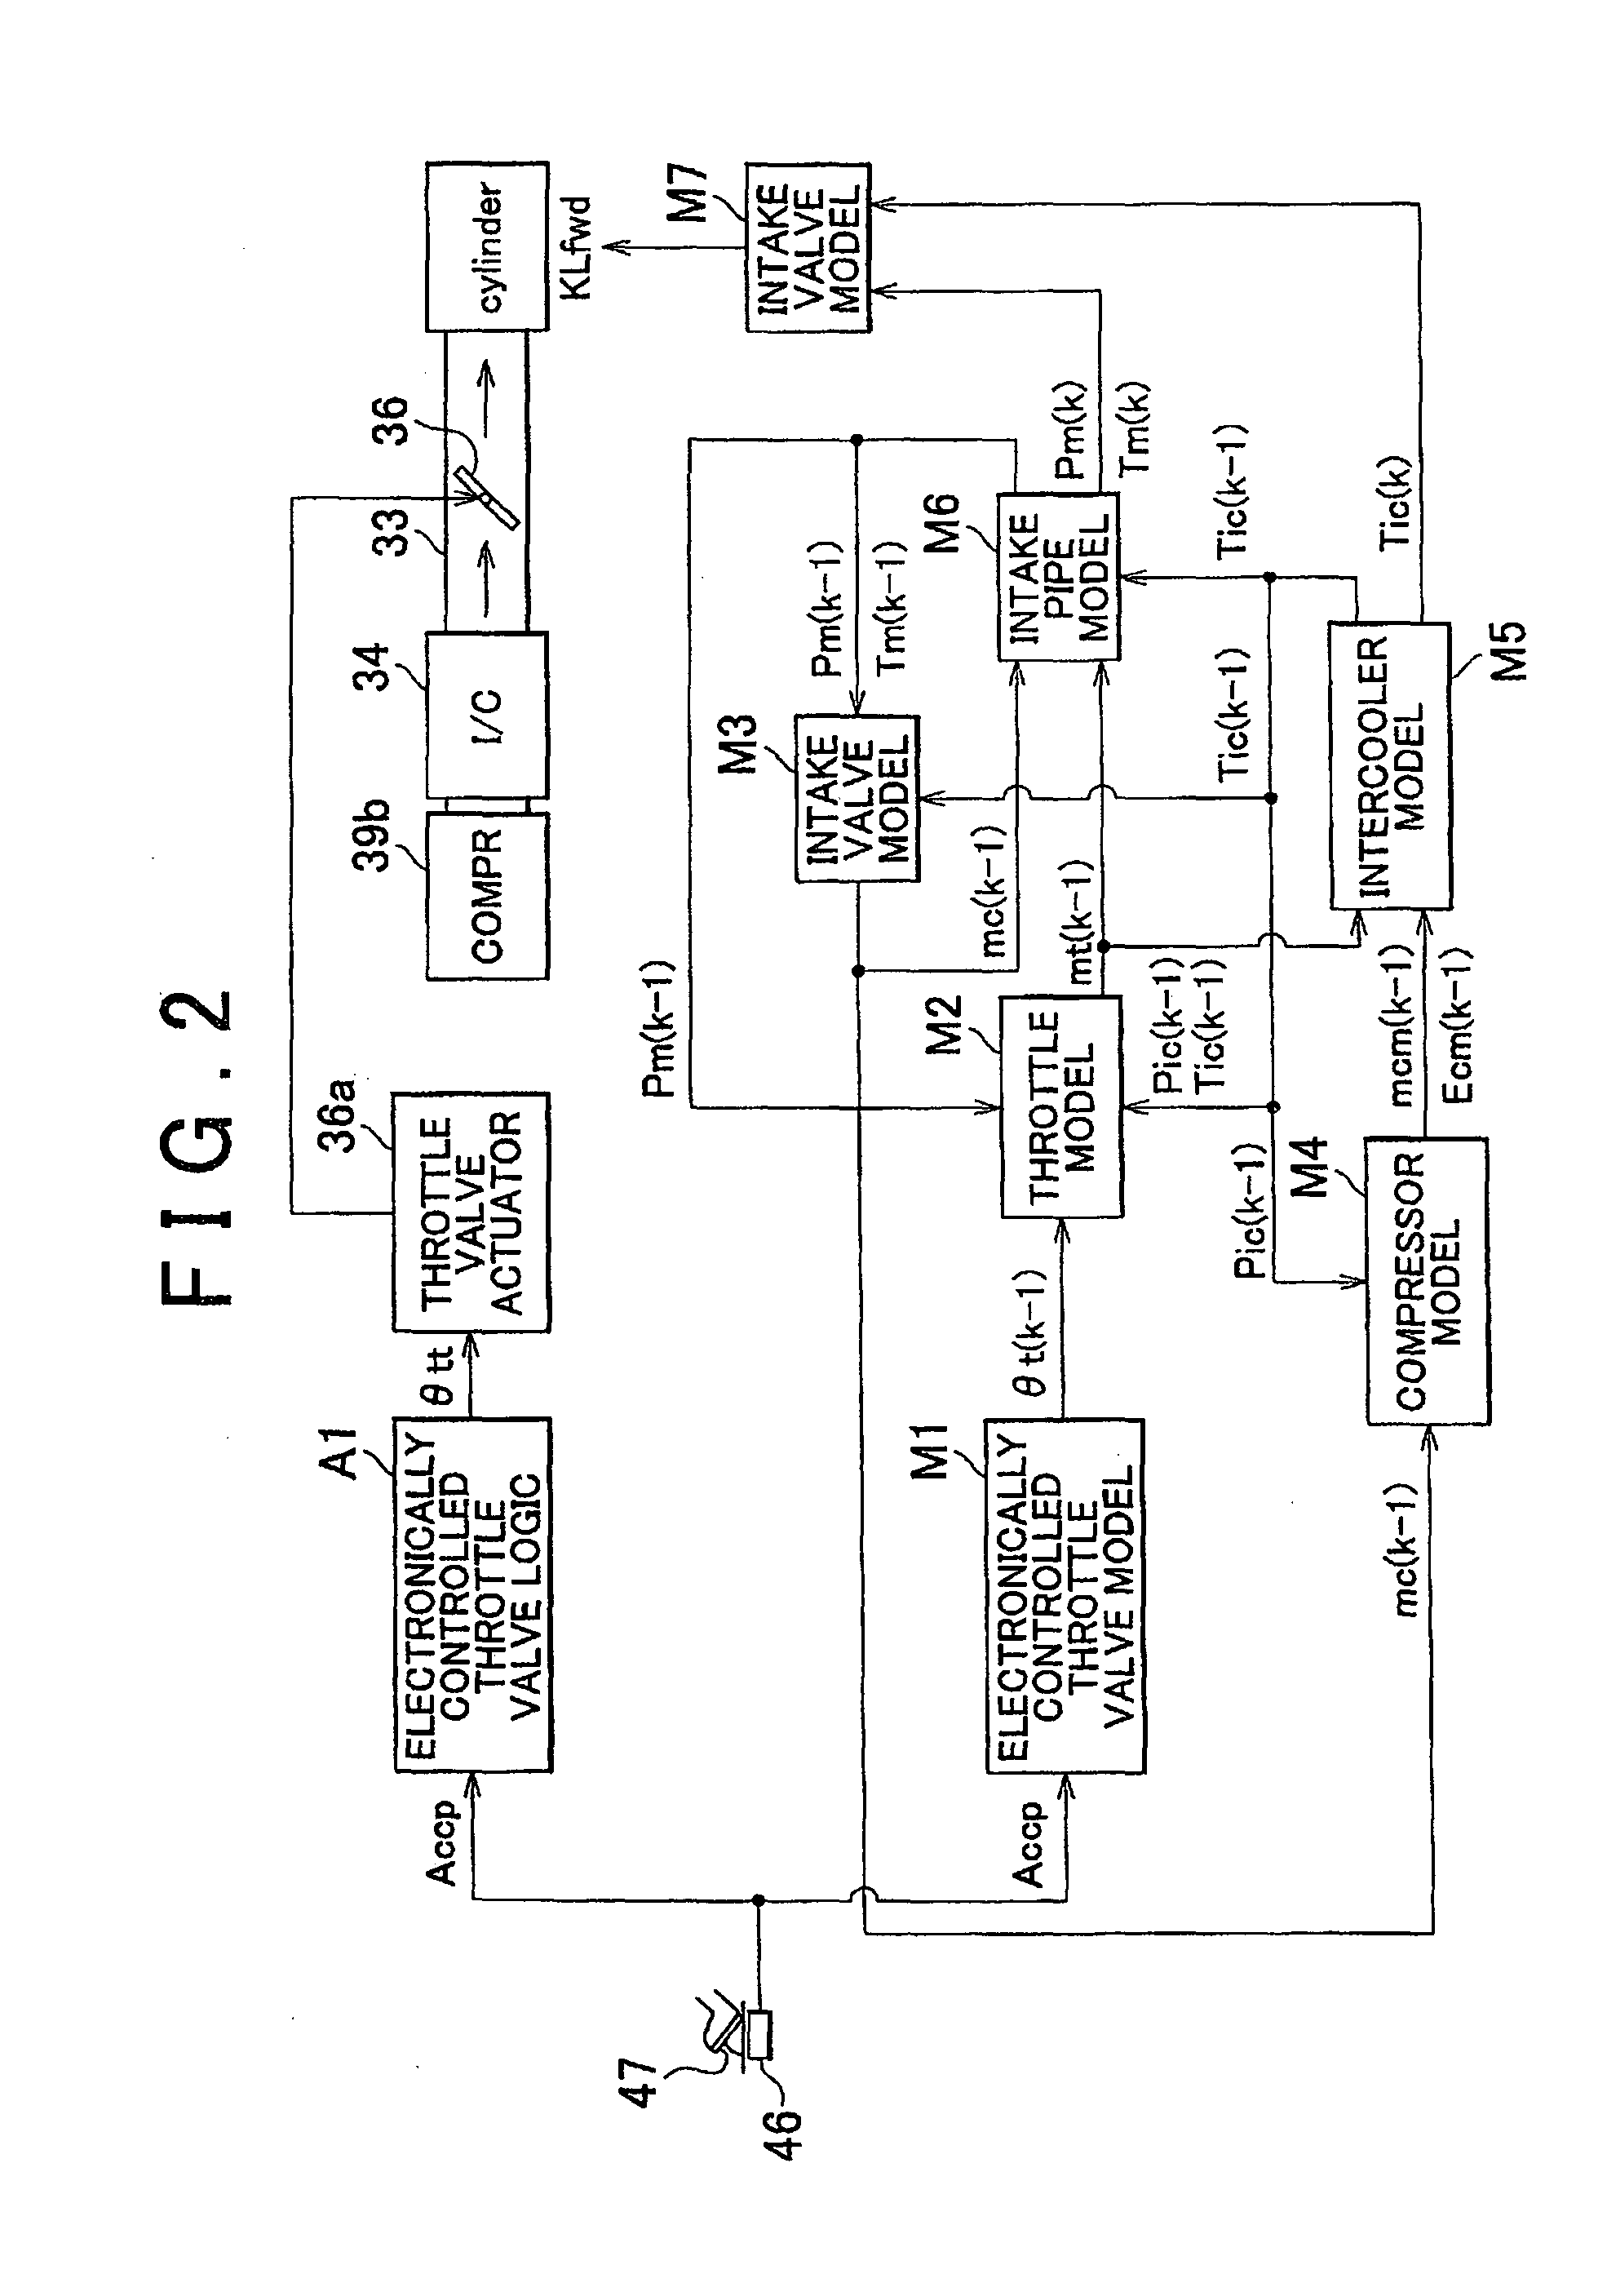 Internal combustion engine system control device